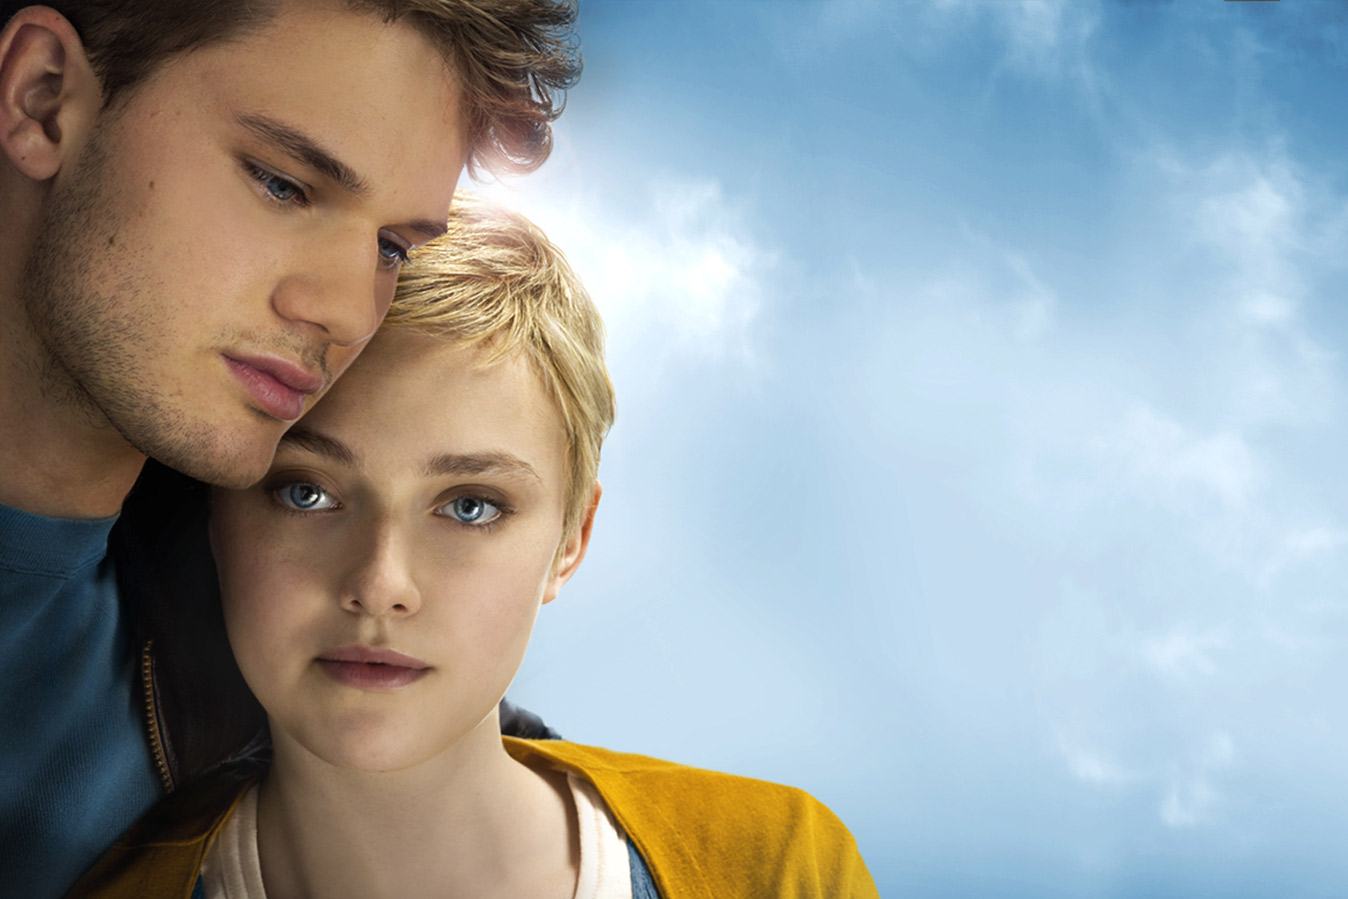 Now Is Good Backgrounds, Compatible - PC, Mobile, Gadgets| 1348x899 px